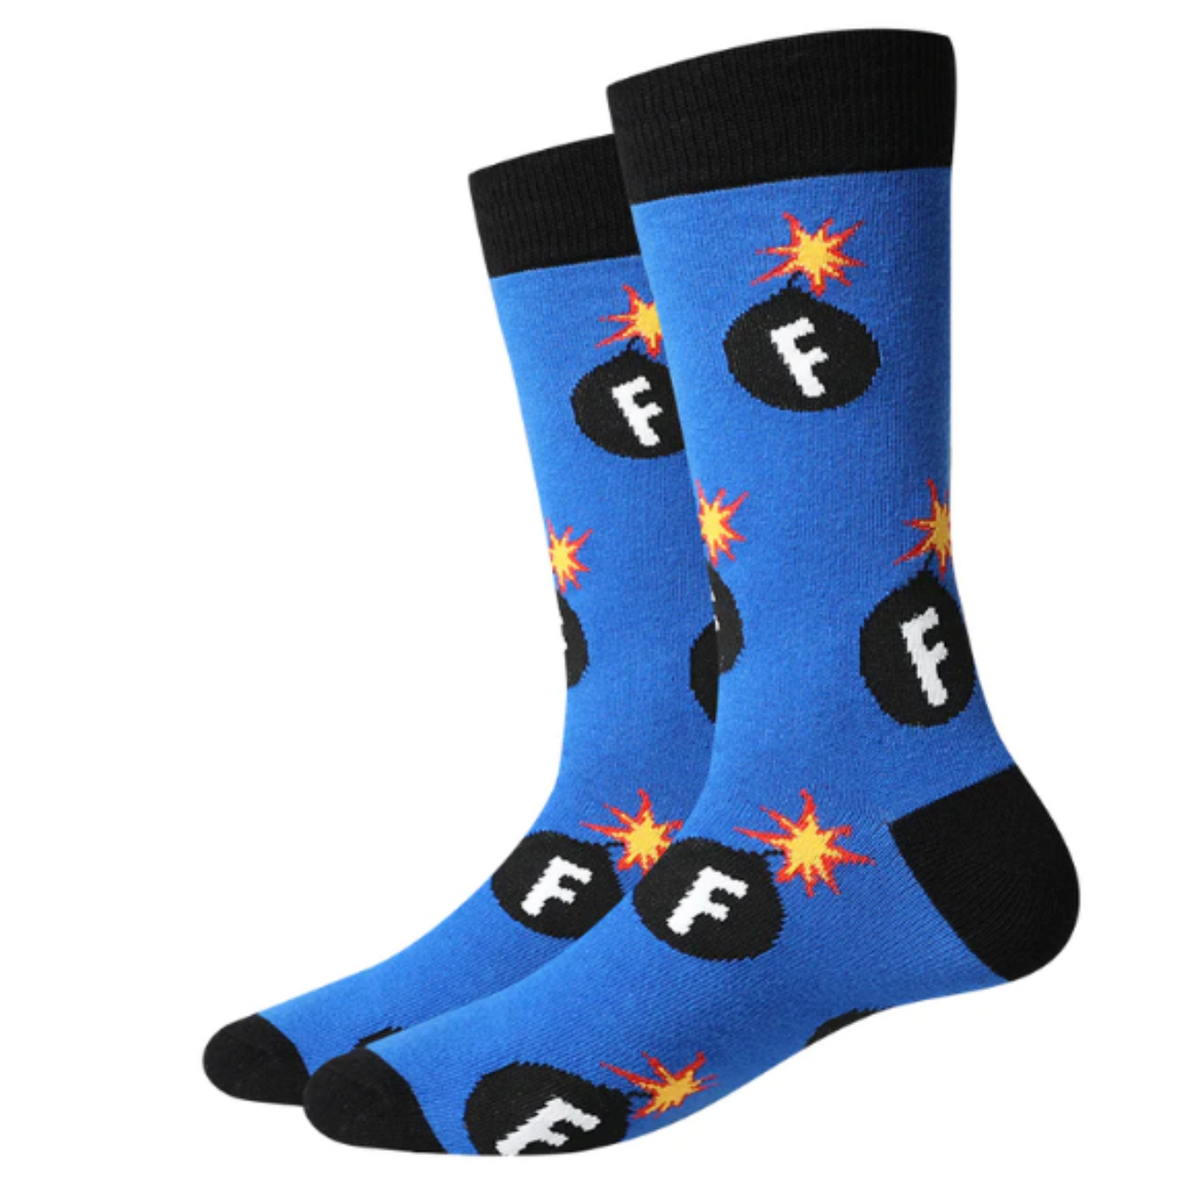 Sock Harbor F Bomb women&#39;s and men&#39;s sock featuring navy blue sock with red cuff, toe, and heel and black bombs with F on it on display feet